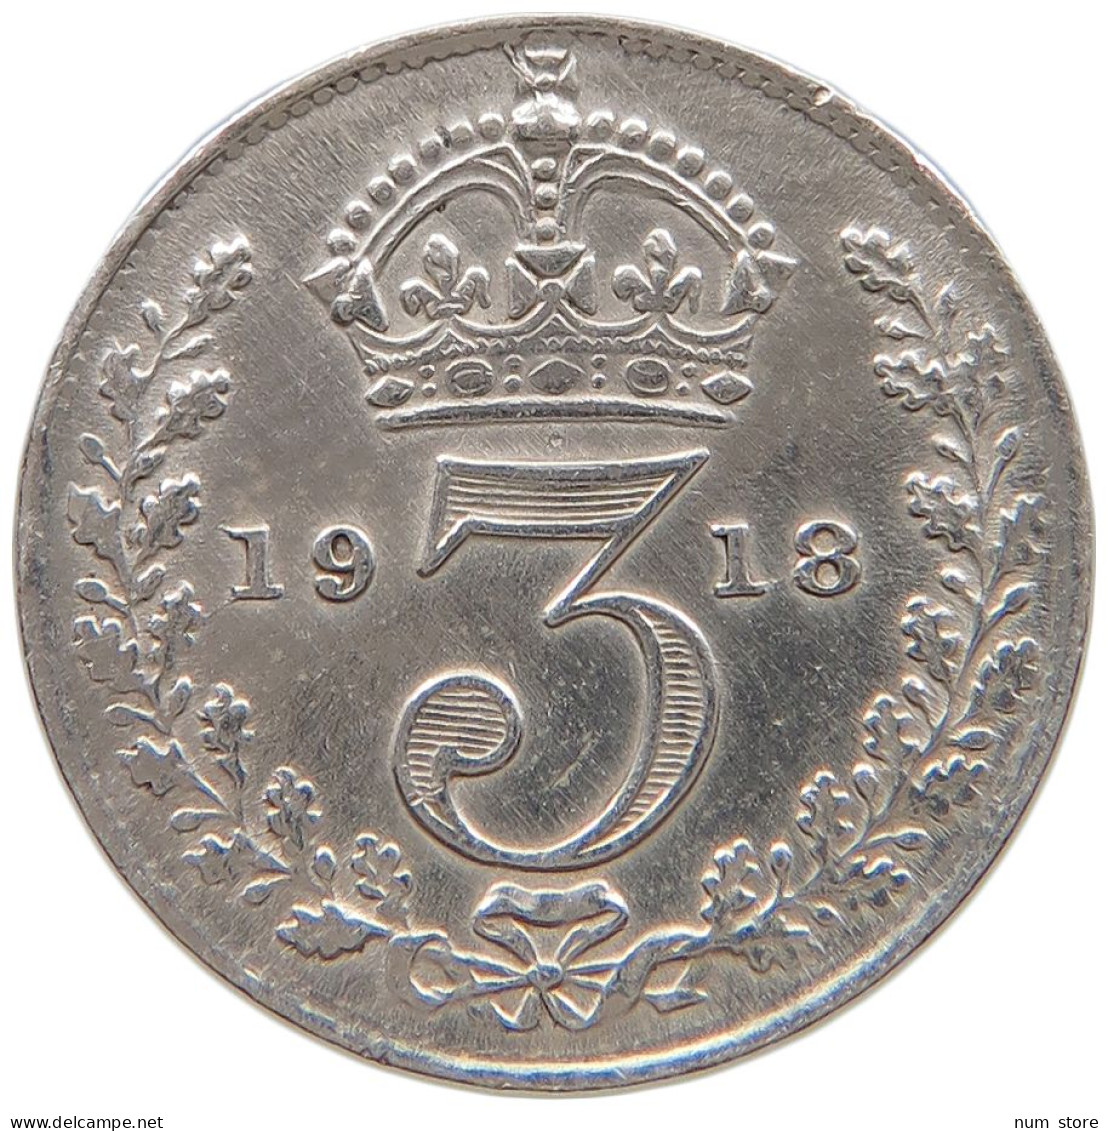 GREAT BRITAIN THREEPENCE 1918 George V. (1910-1936) #t158 0431 - F. 3 Pence